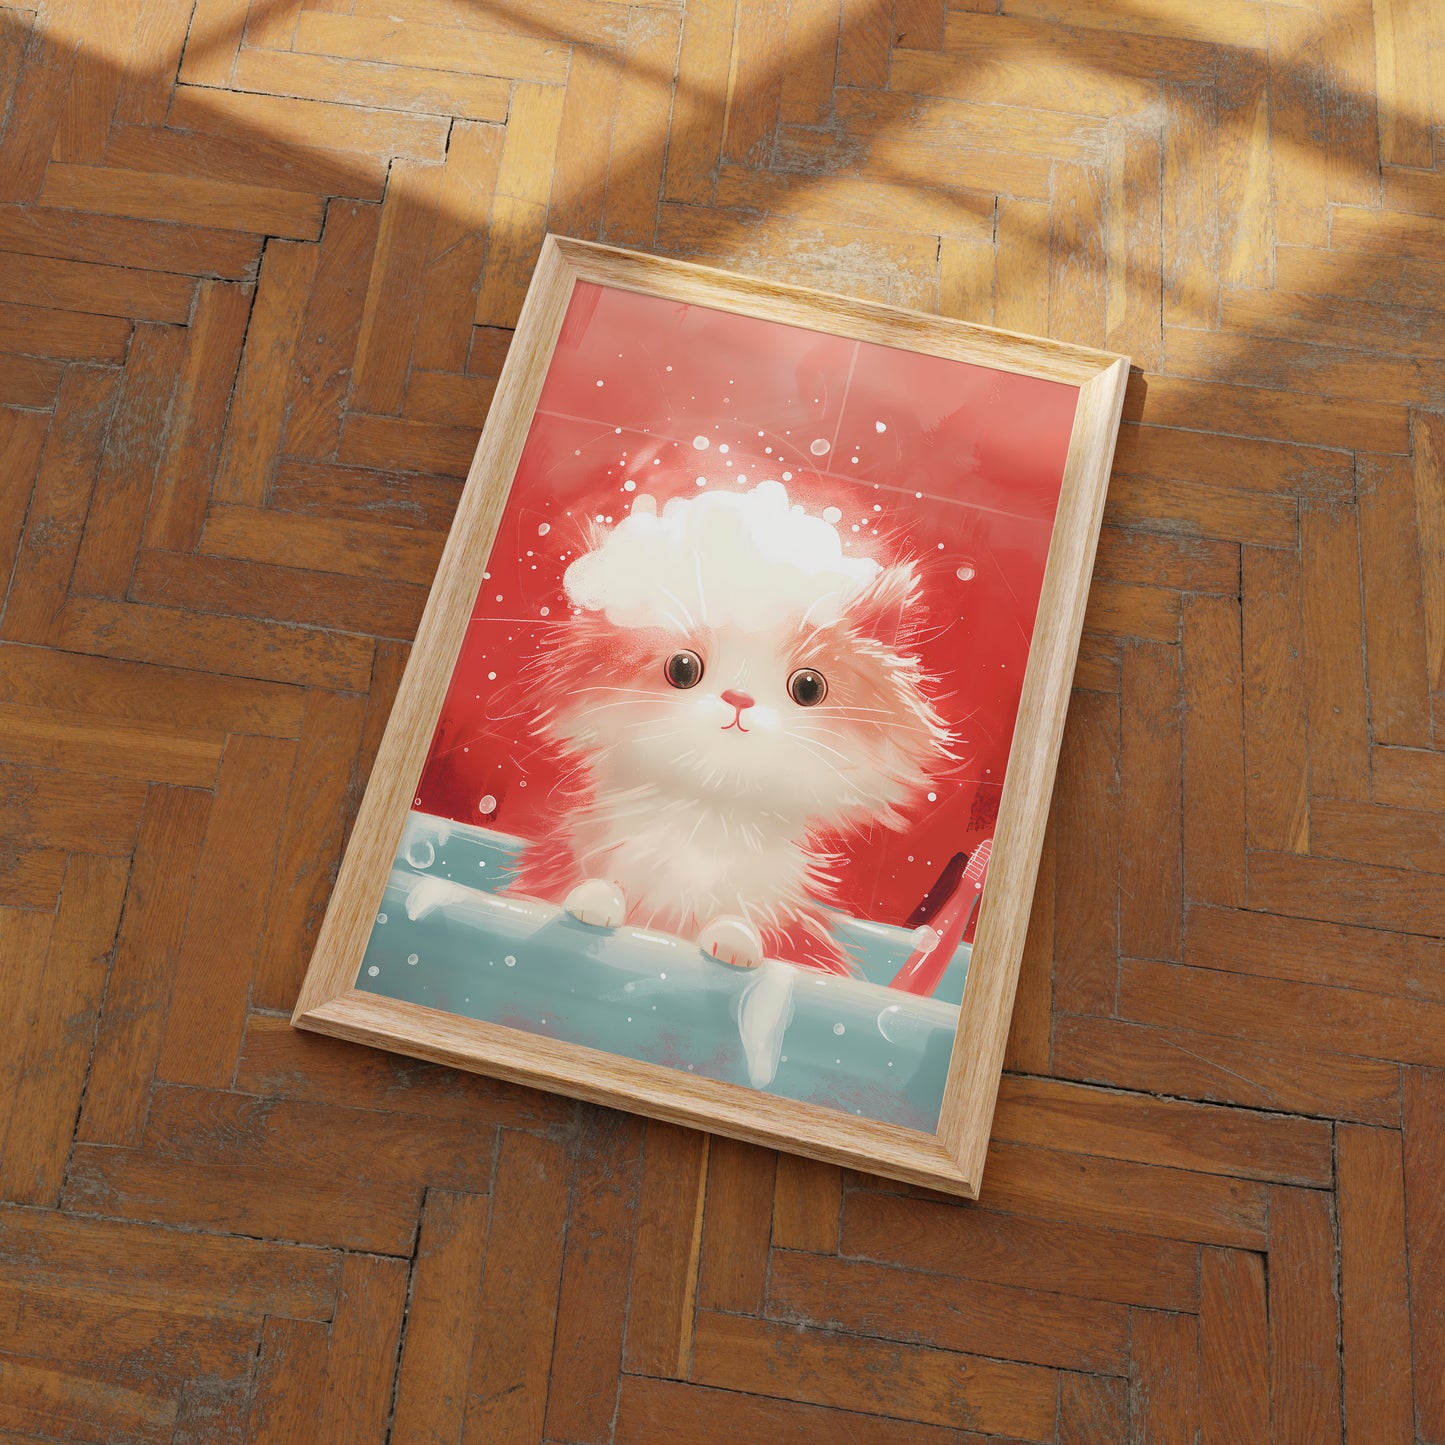 A cute illustration of a fluffy white cat in a box framed on a wooden floor.